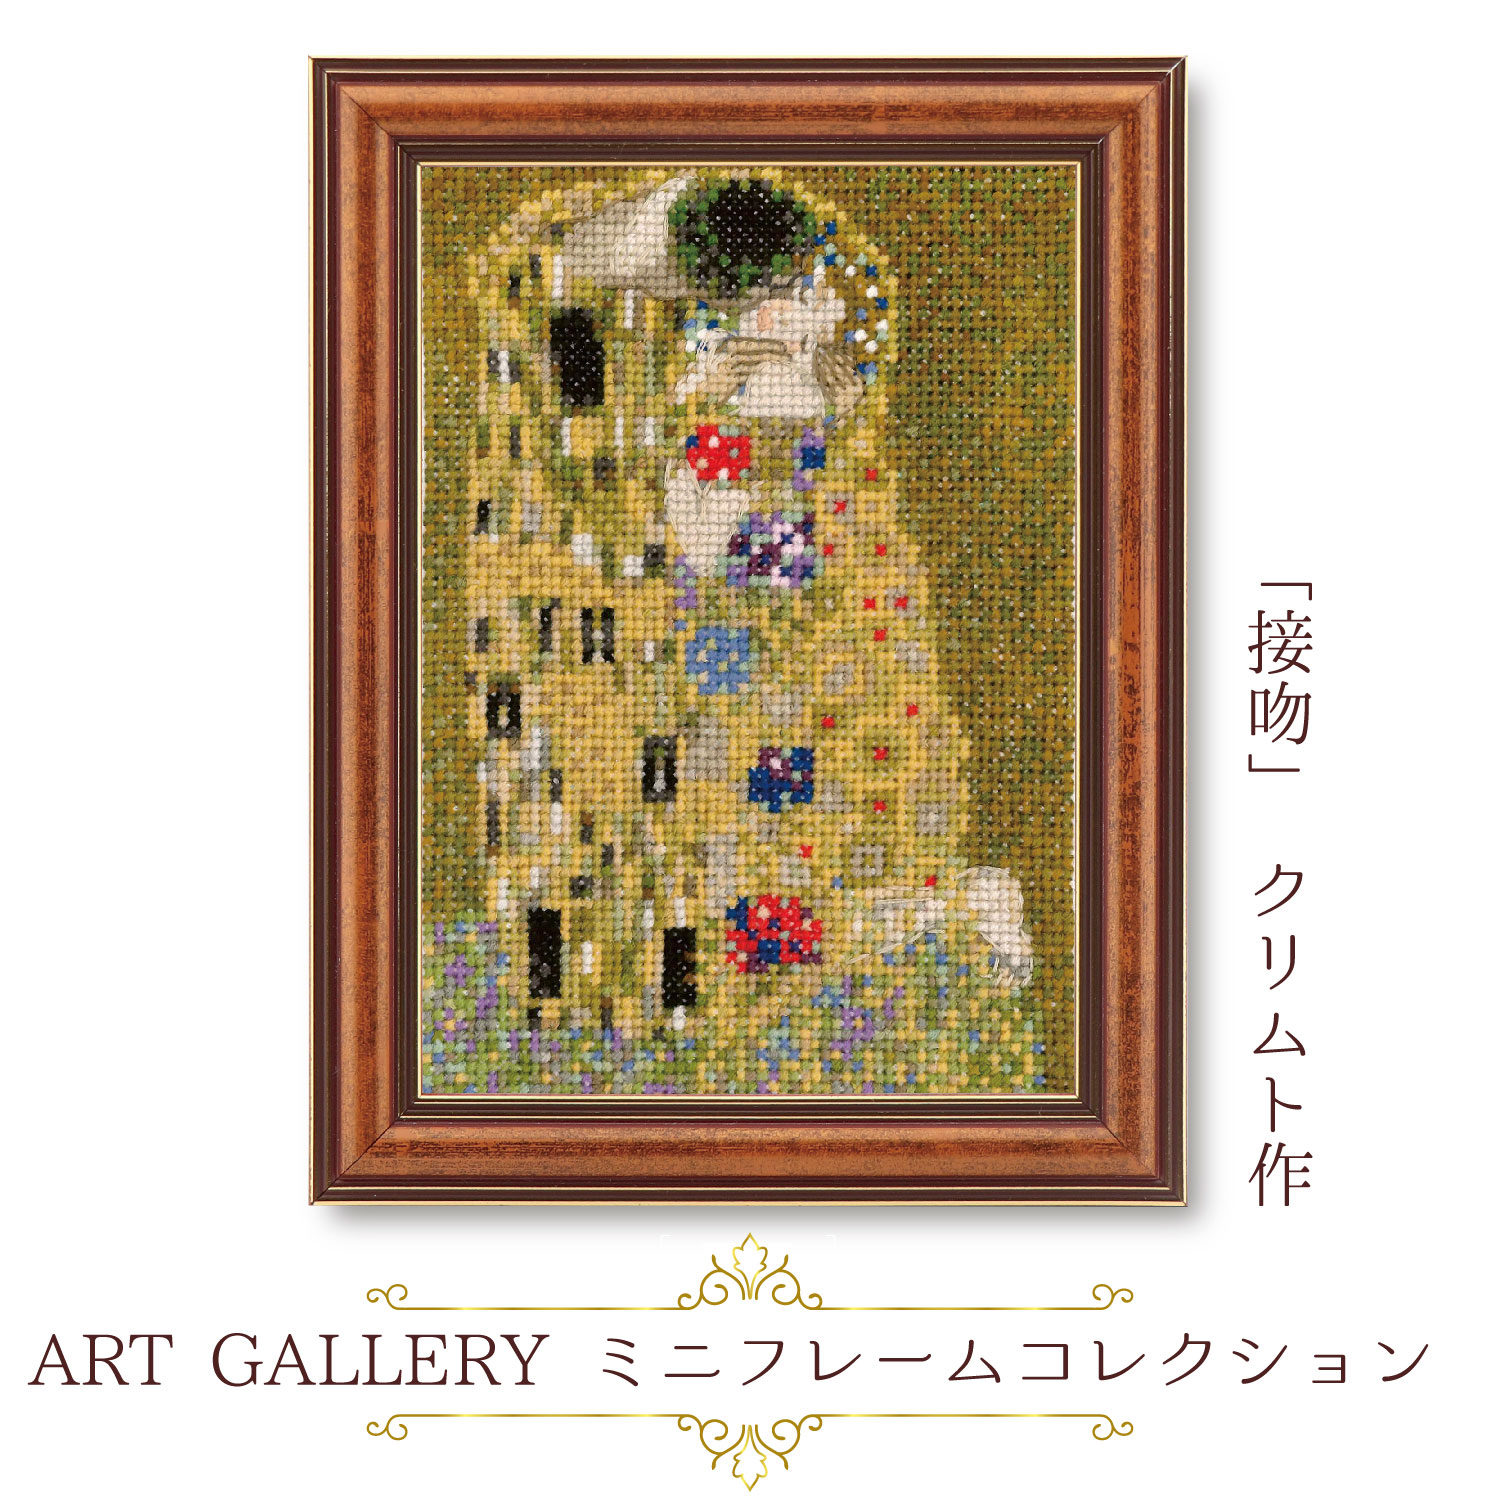 OLY-K7584 OLYMPUS Embroidery Kit ART GALLERY Mini Frame Collection "Kiss" by Klimt (pcs)